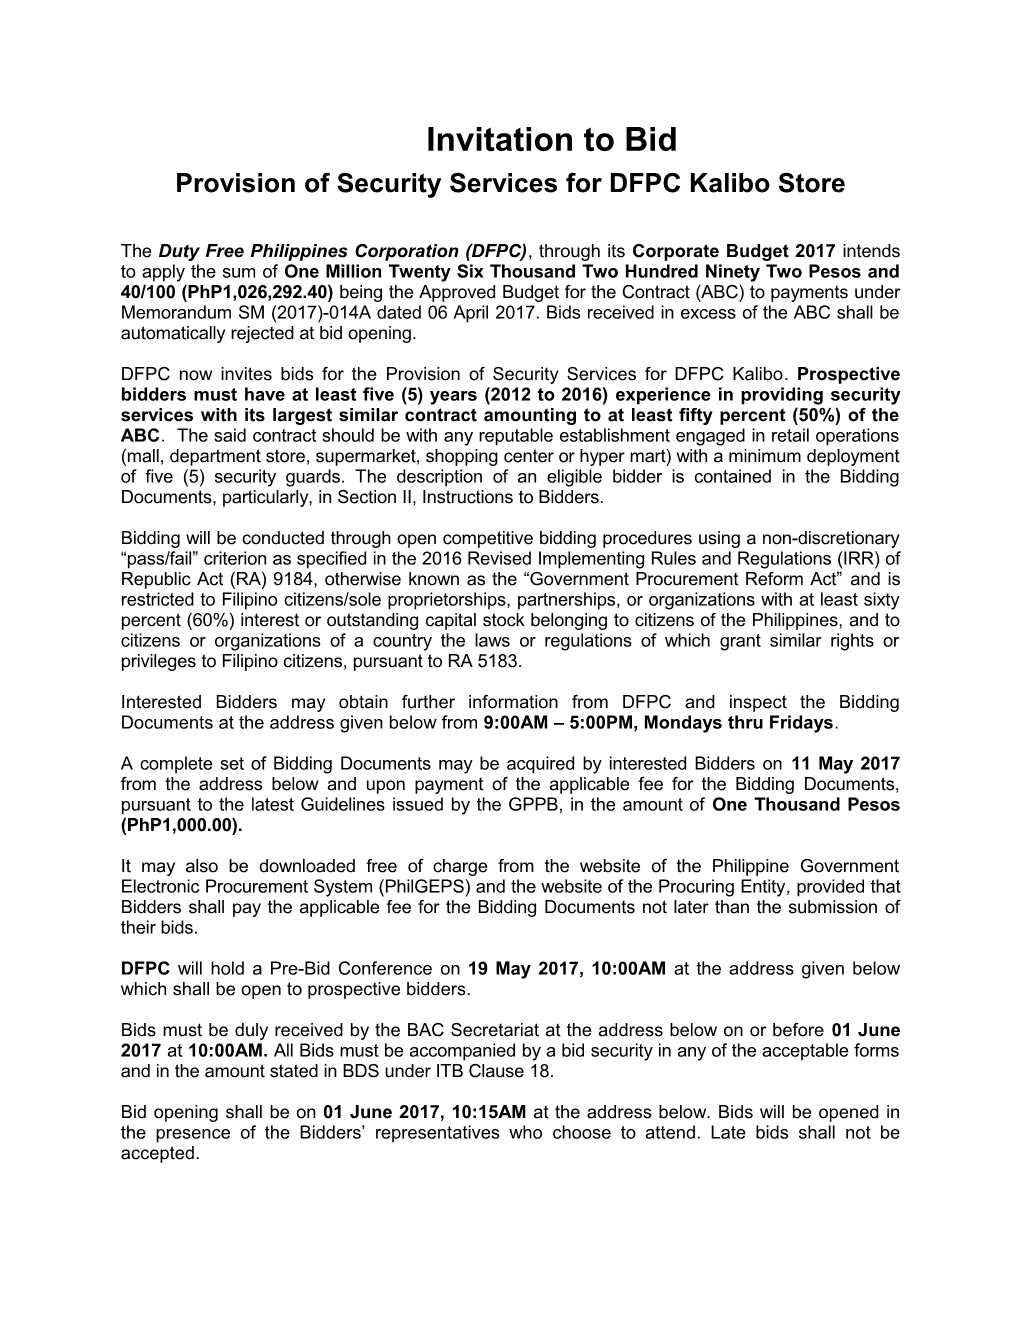 Provision of Security Services for DFPC Kalibo Store